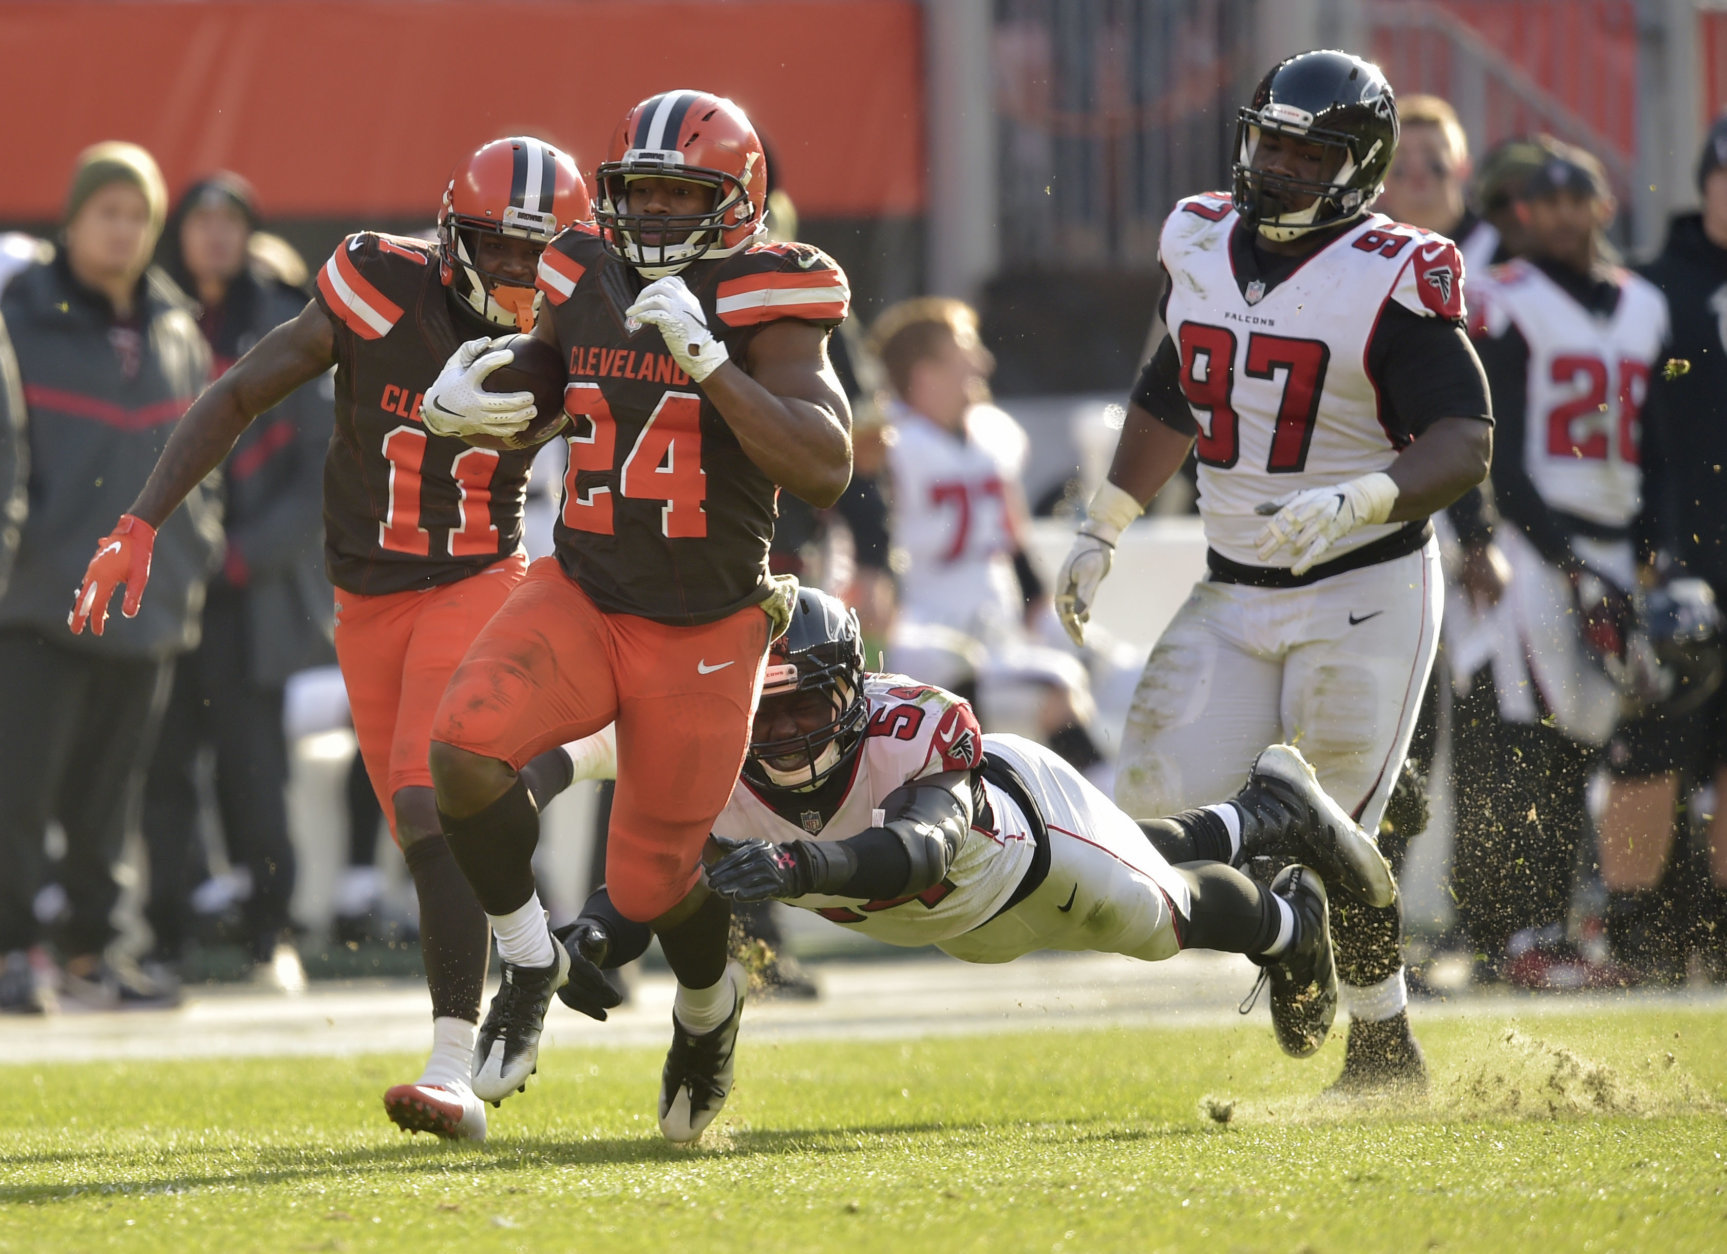 Cleveland Browns running back Nick Chubb (24) rushes for a 92-yard touchdown as Atlanta Falcons linebacker Foye Oluokun (54) misses the tackle in the second half of an NFL football game, Sunday, Nov. 11, 2018, in Cleveland. (AP Photo/David Richard)